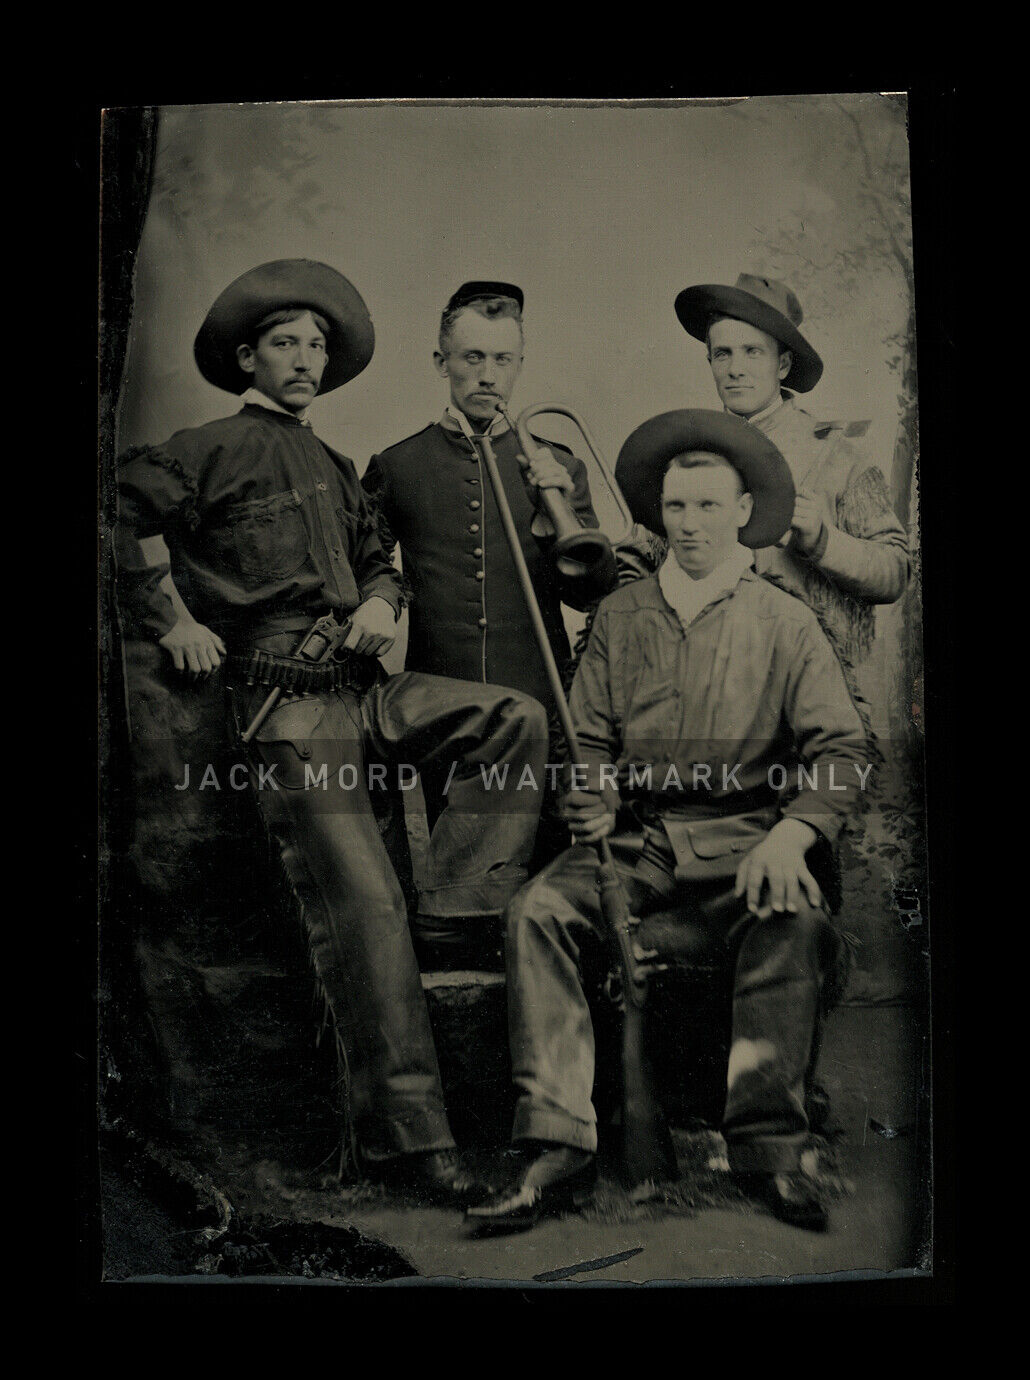 Excellent Armed Cowboys & Soldiers - Antique Tintype Photo, 1800s Rare